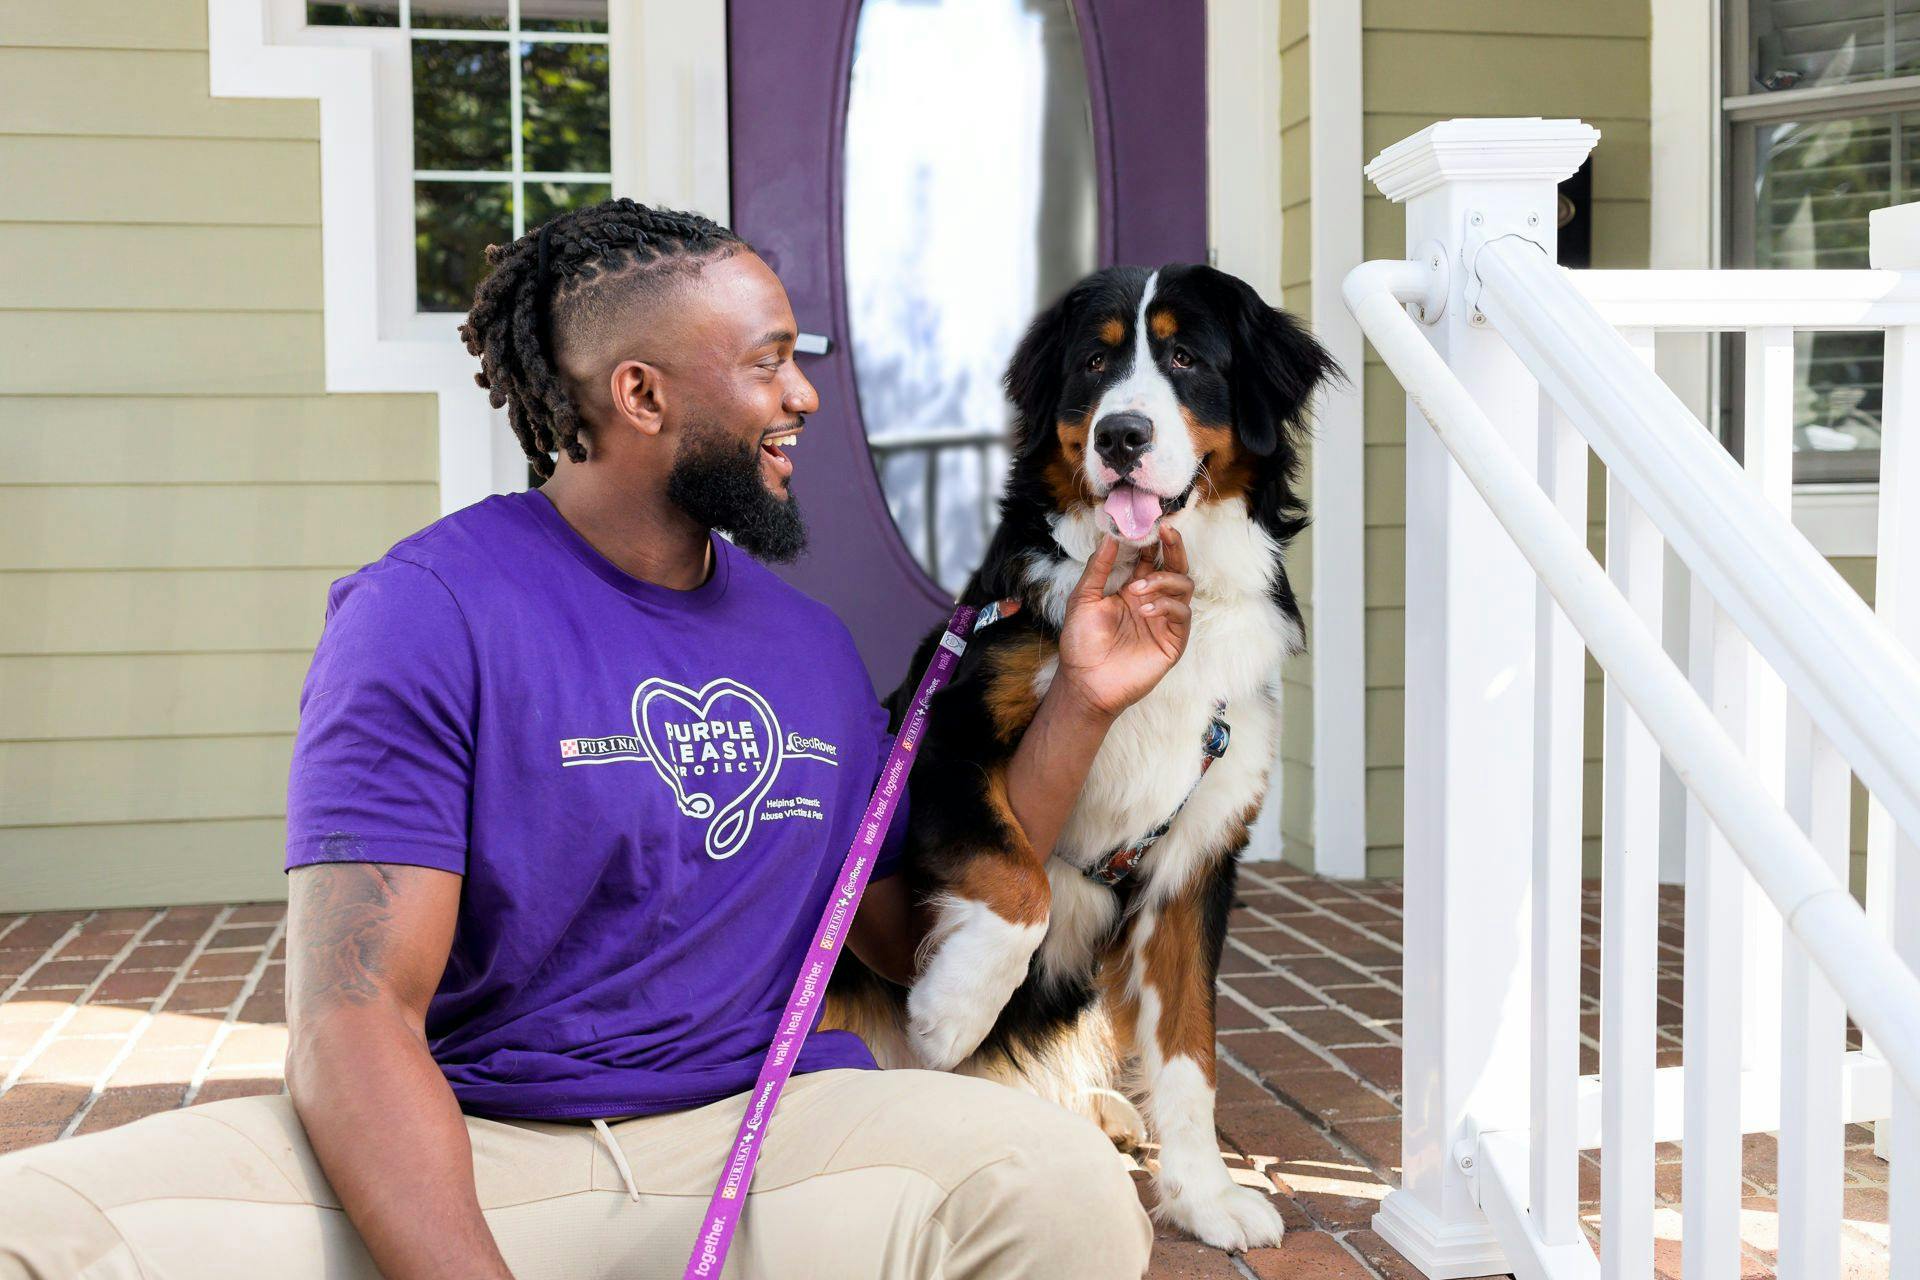 James Smith-Williams and a dog at a local shelter in Arlington, Virginia (Images courtesy of Purina).